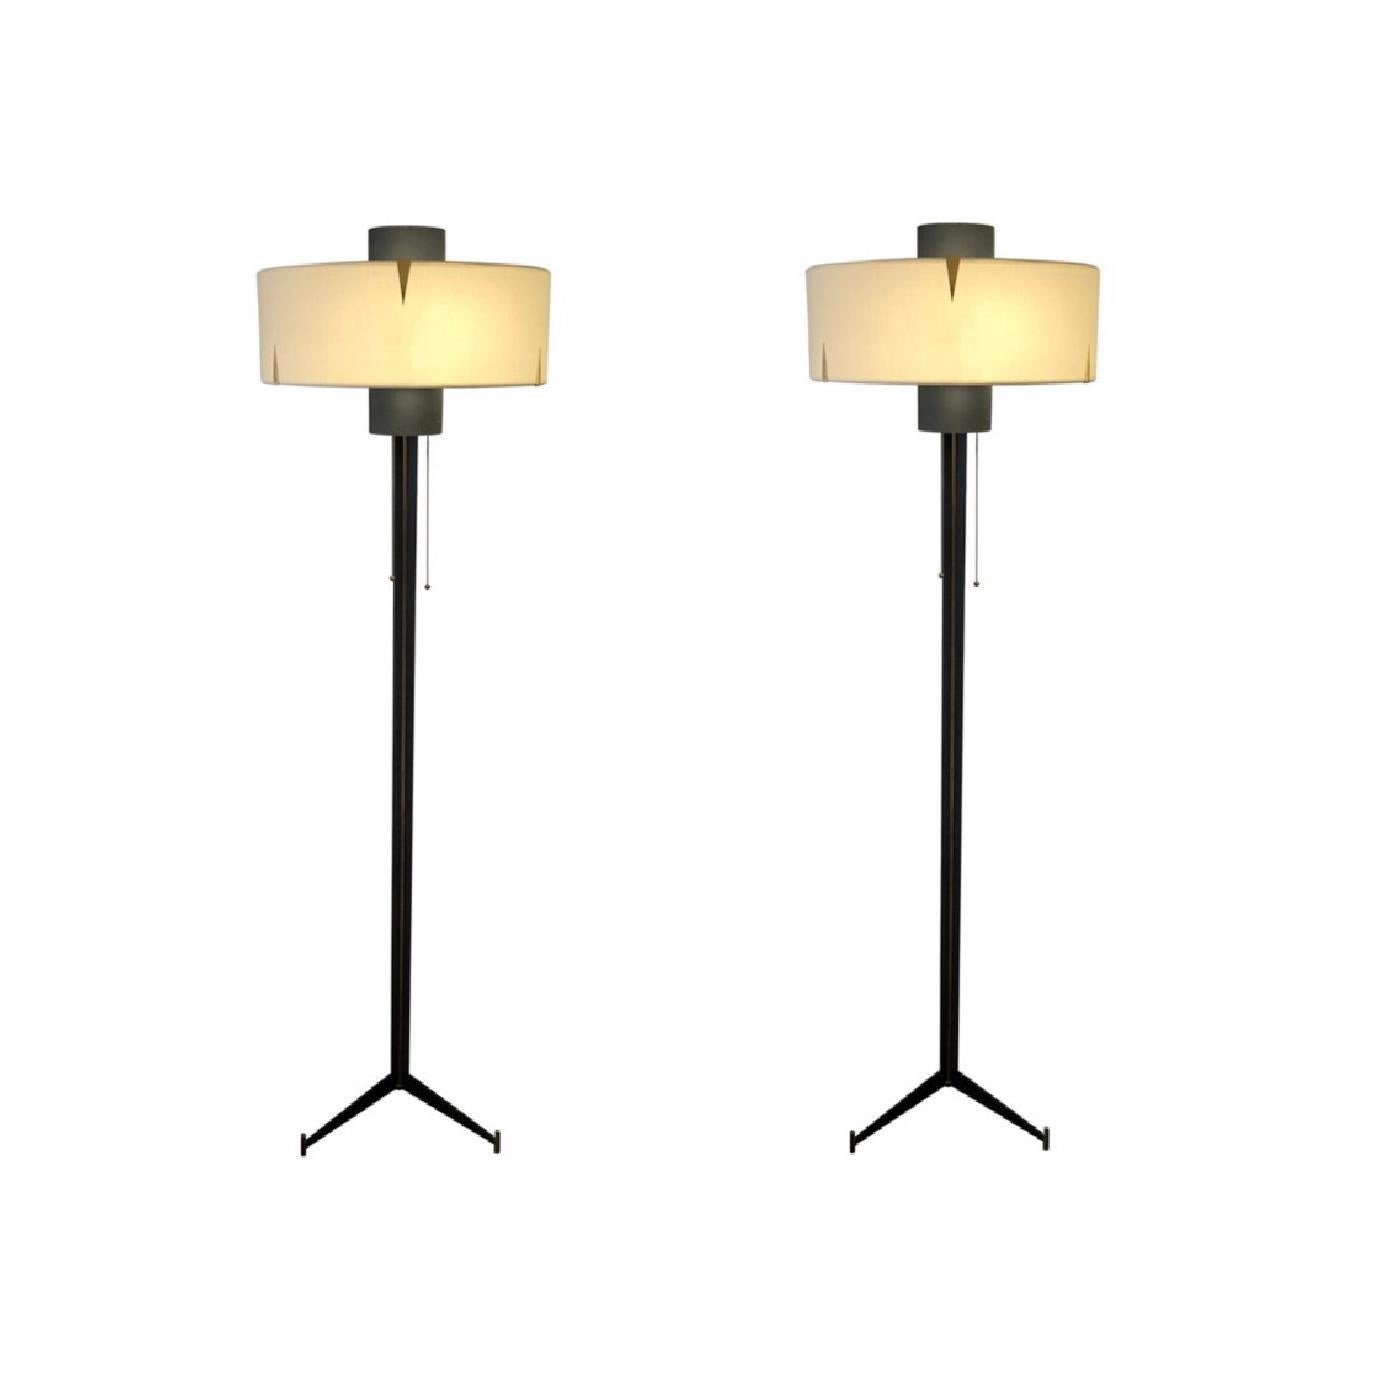 Pair of Floor Lamps by Maison Arlus, 1950 For Sale 4